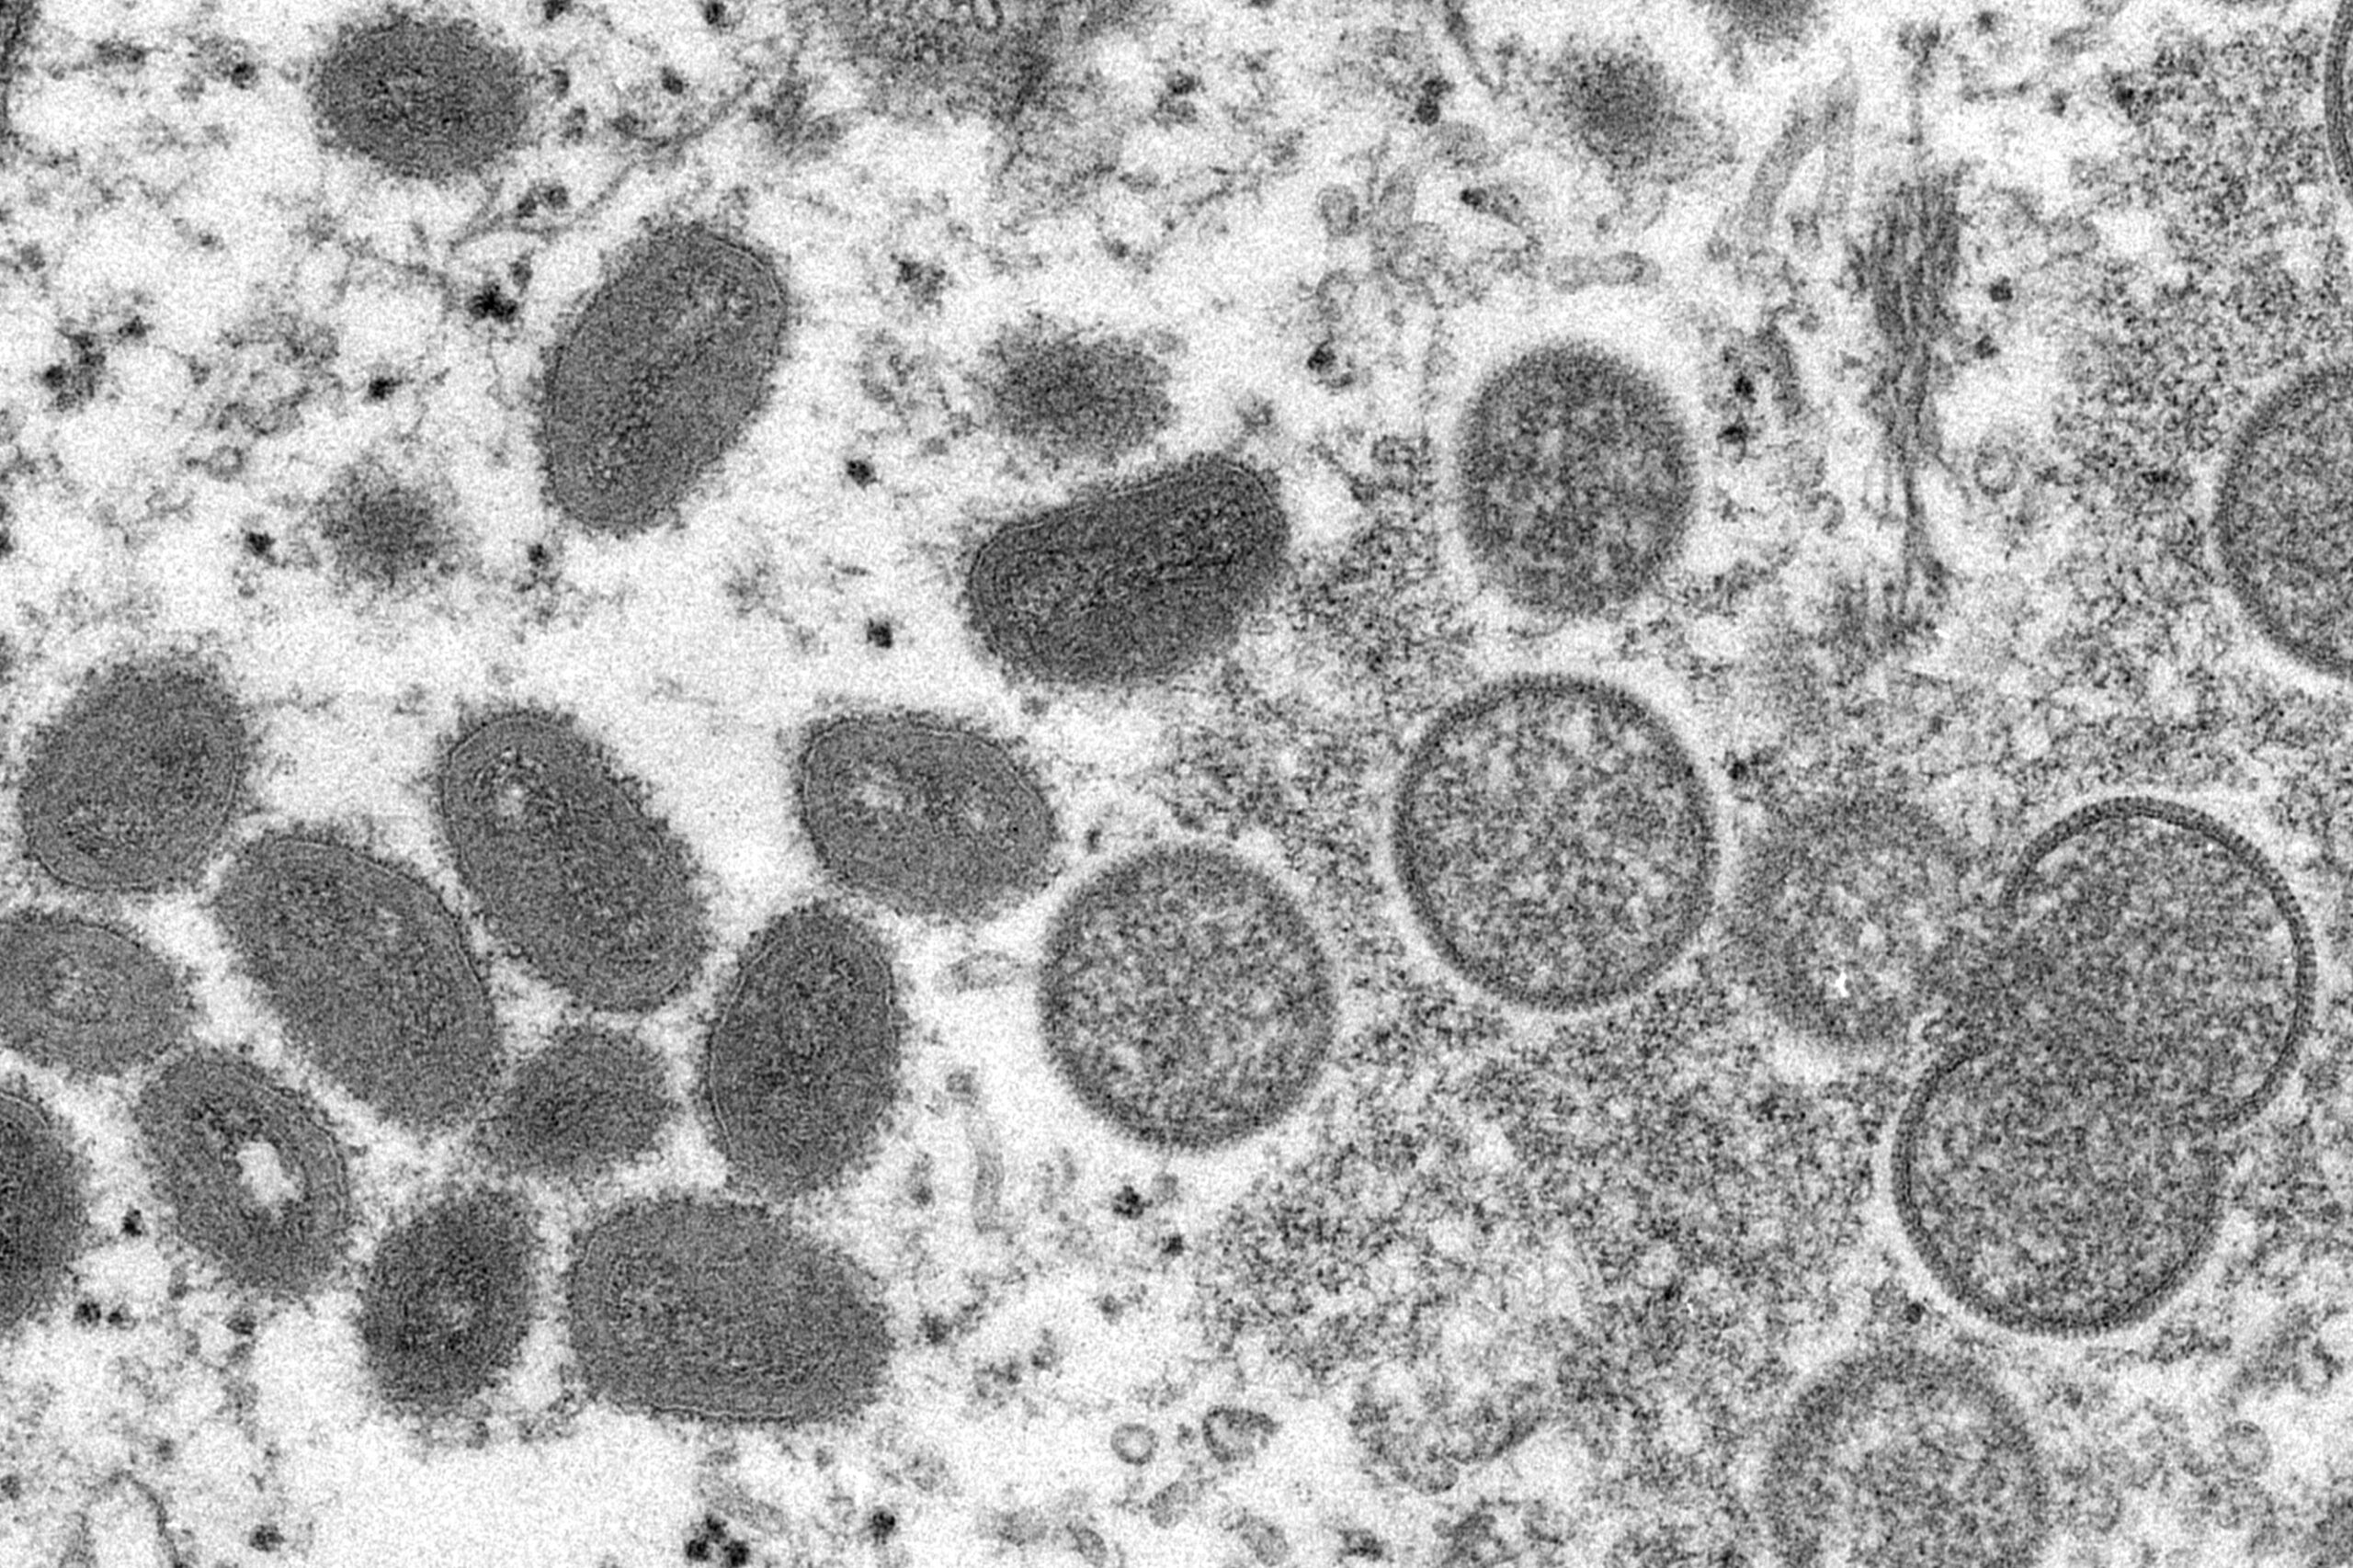 Health officials confirm first monkeypox case in Wisconsin